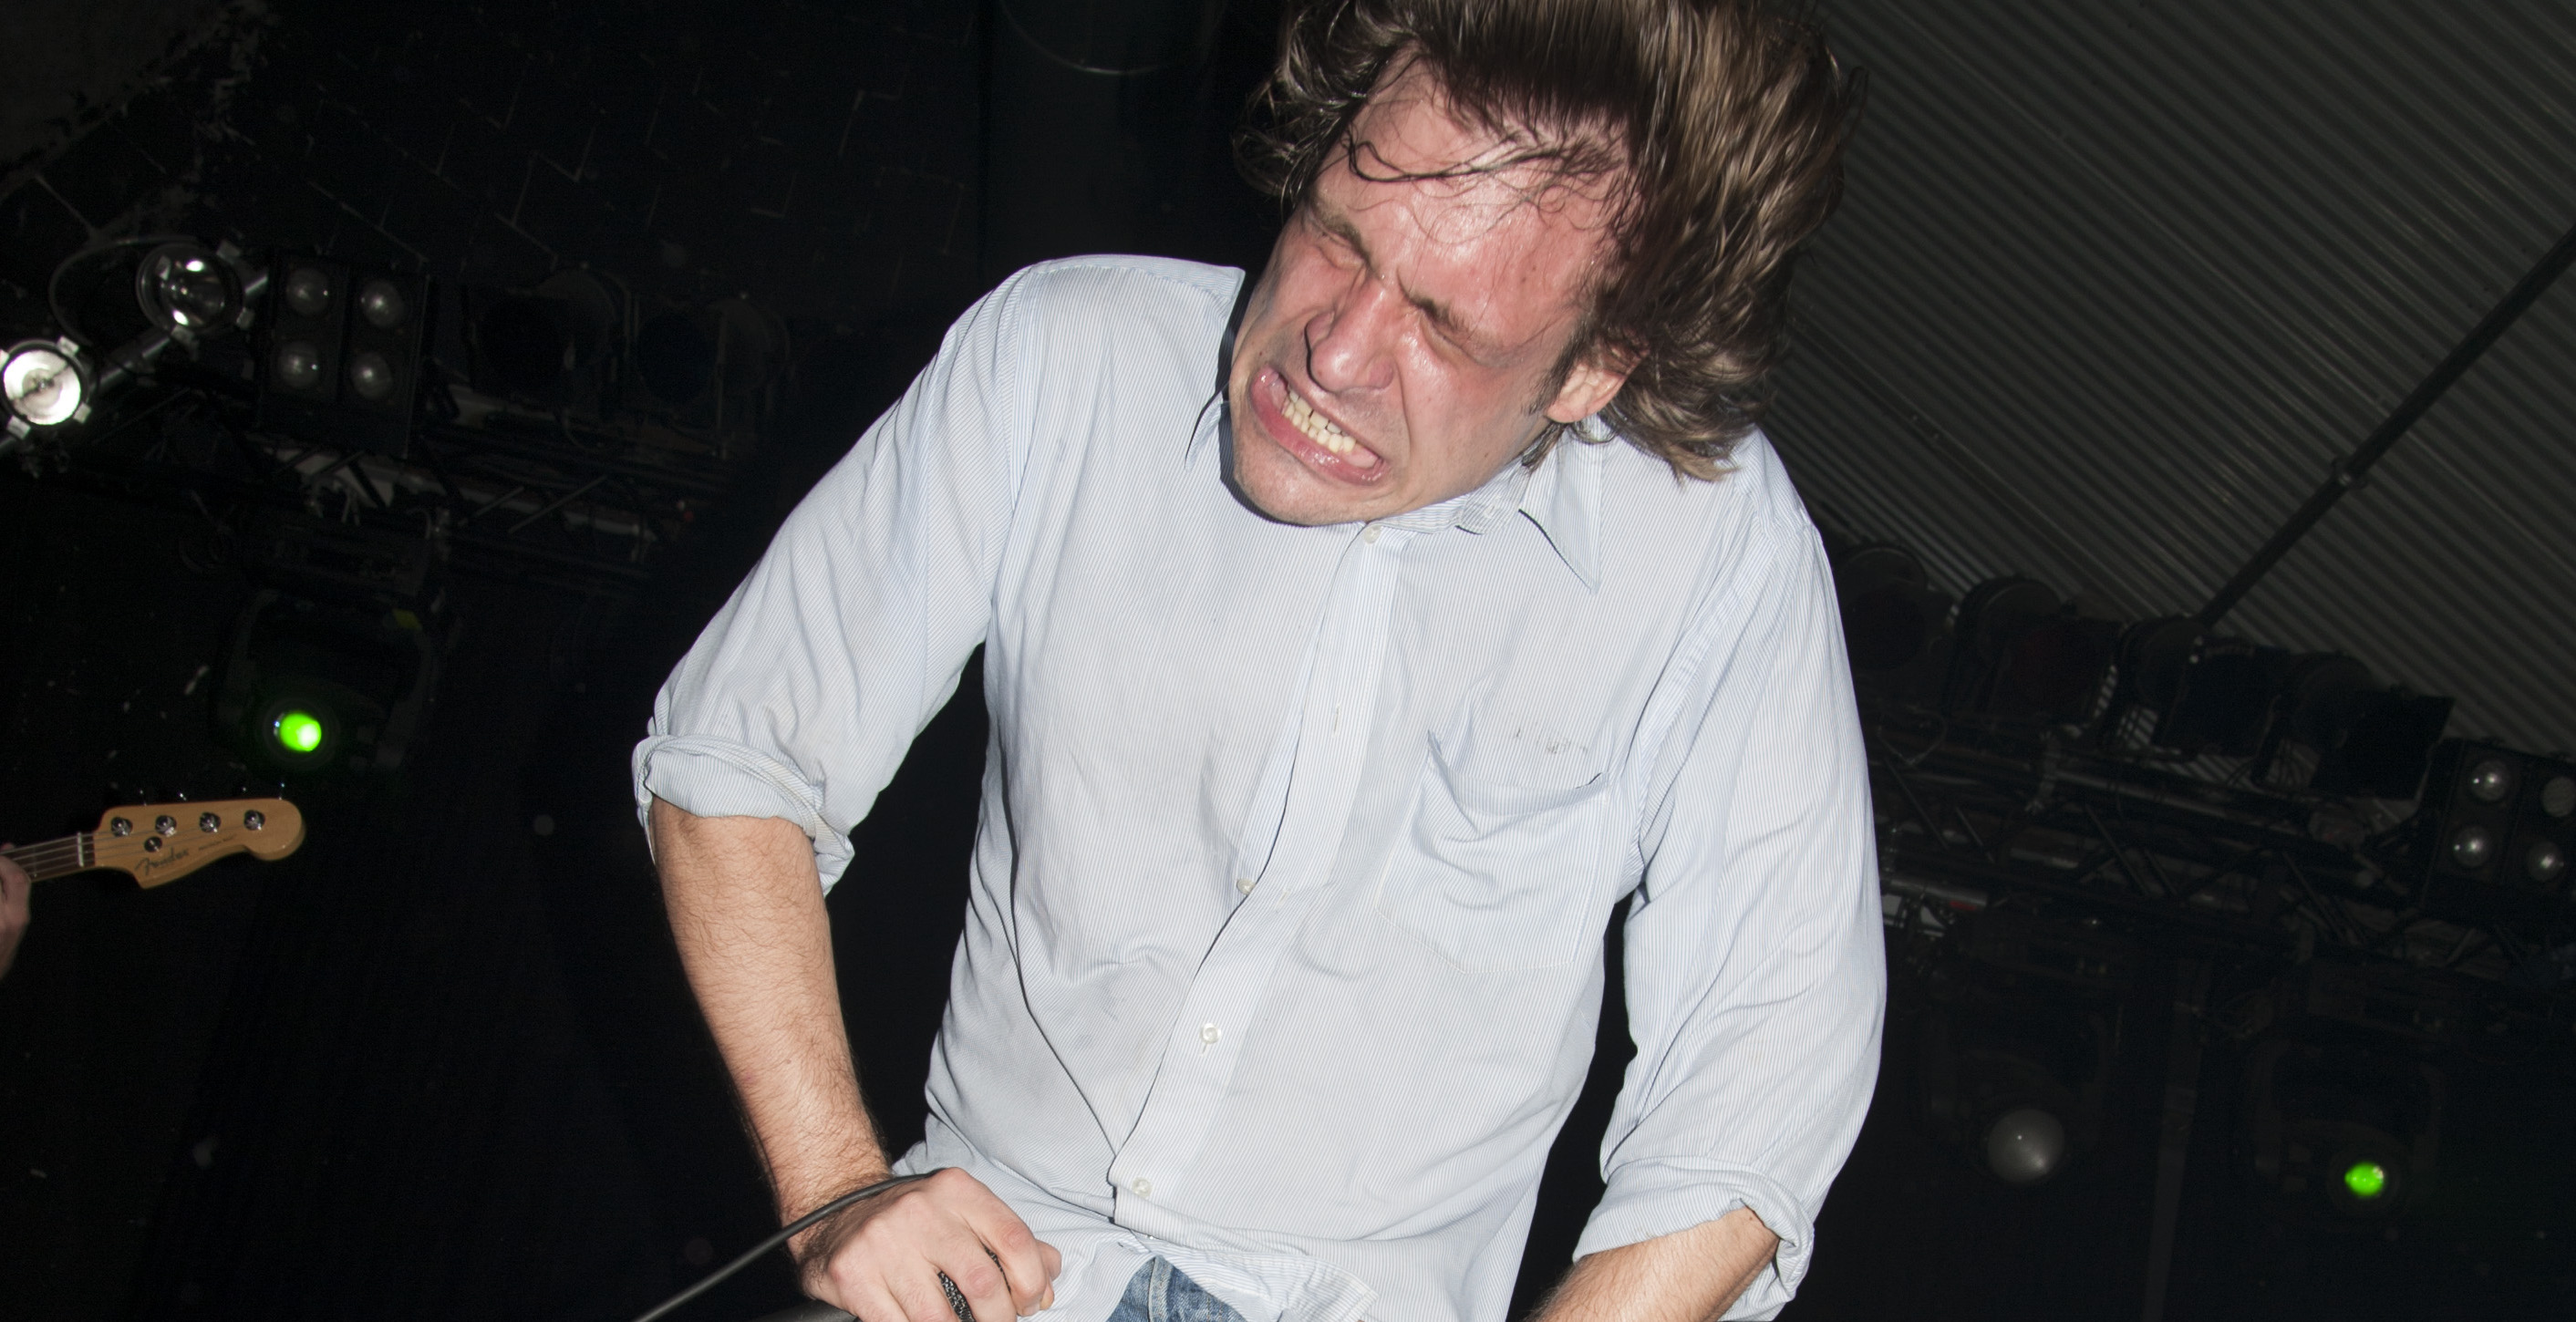 Joseph Maus, Brother and Bandmate of John Maus, Dead at 30